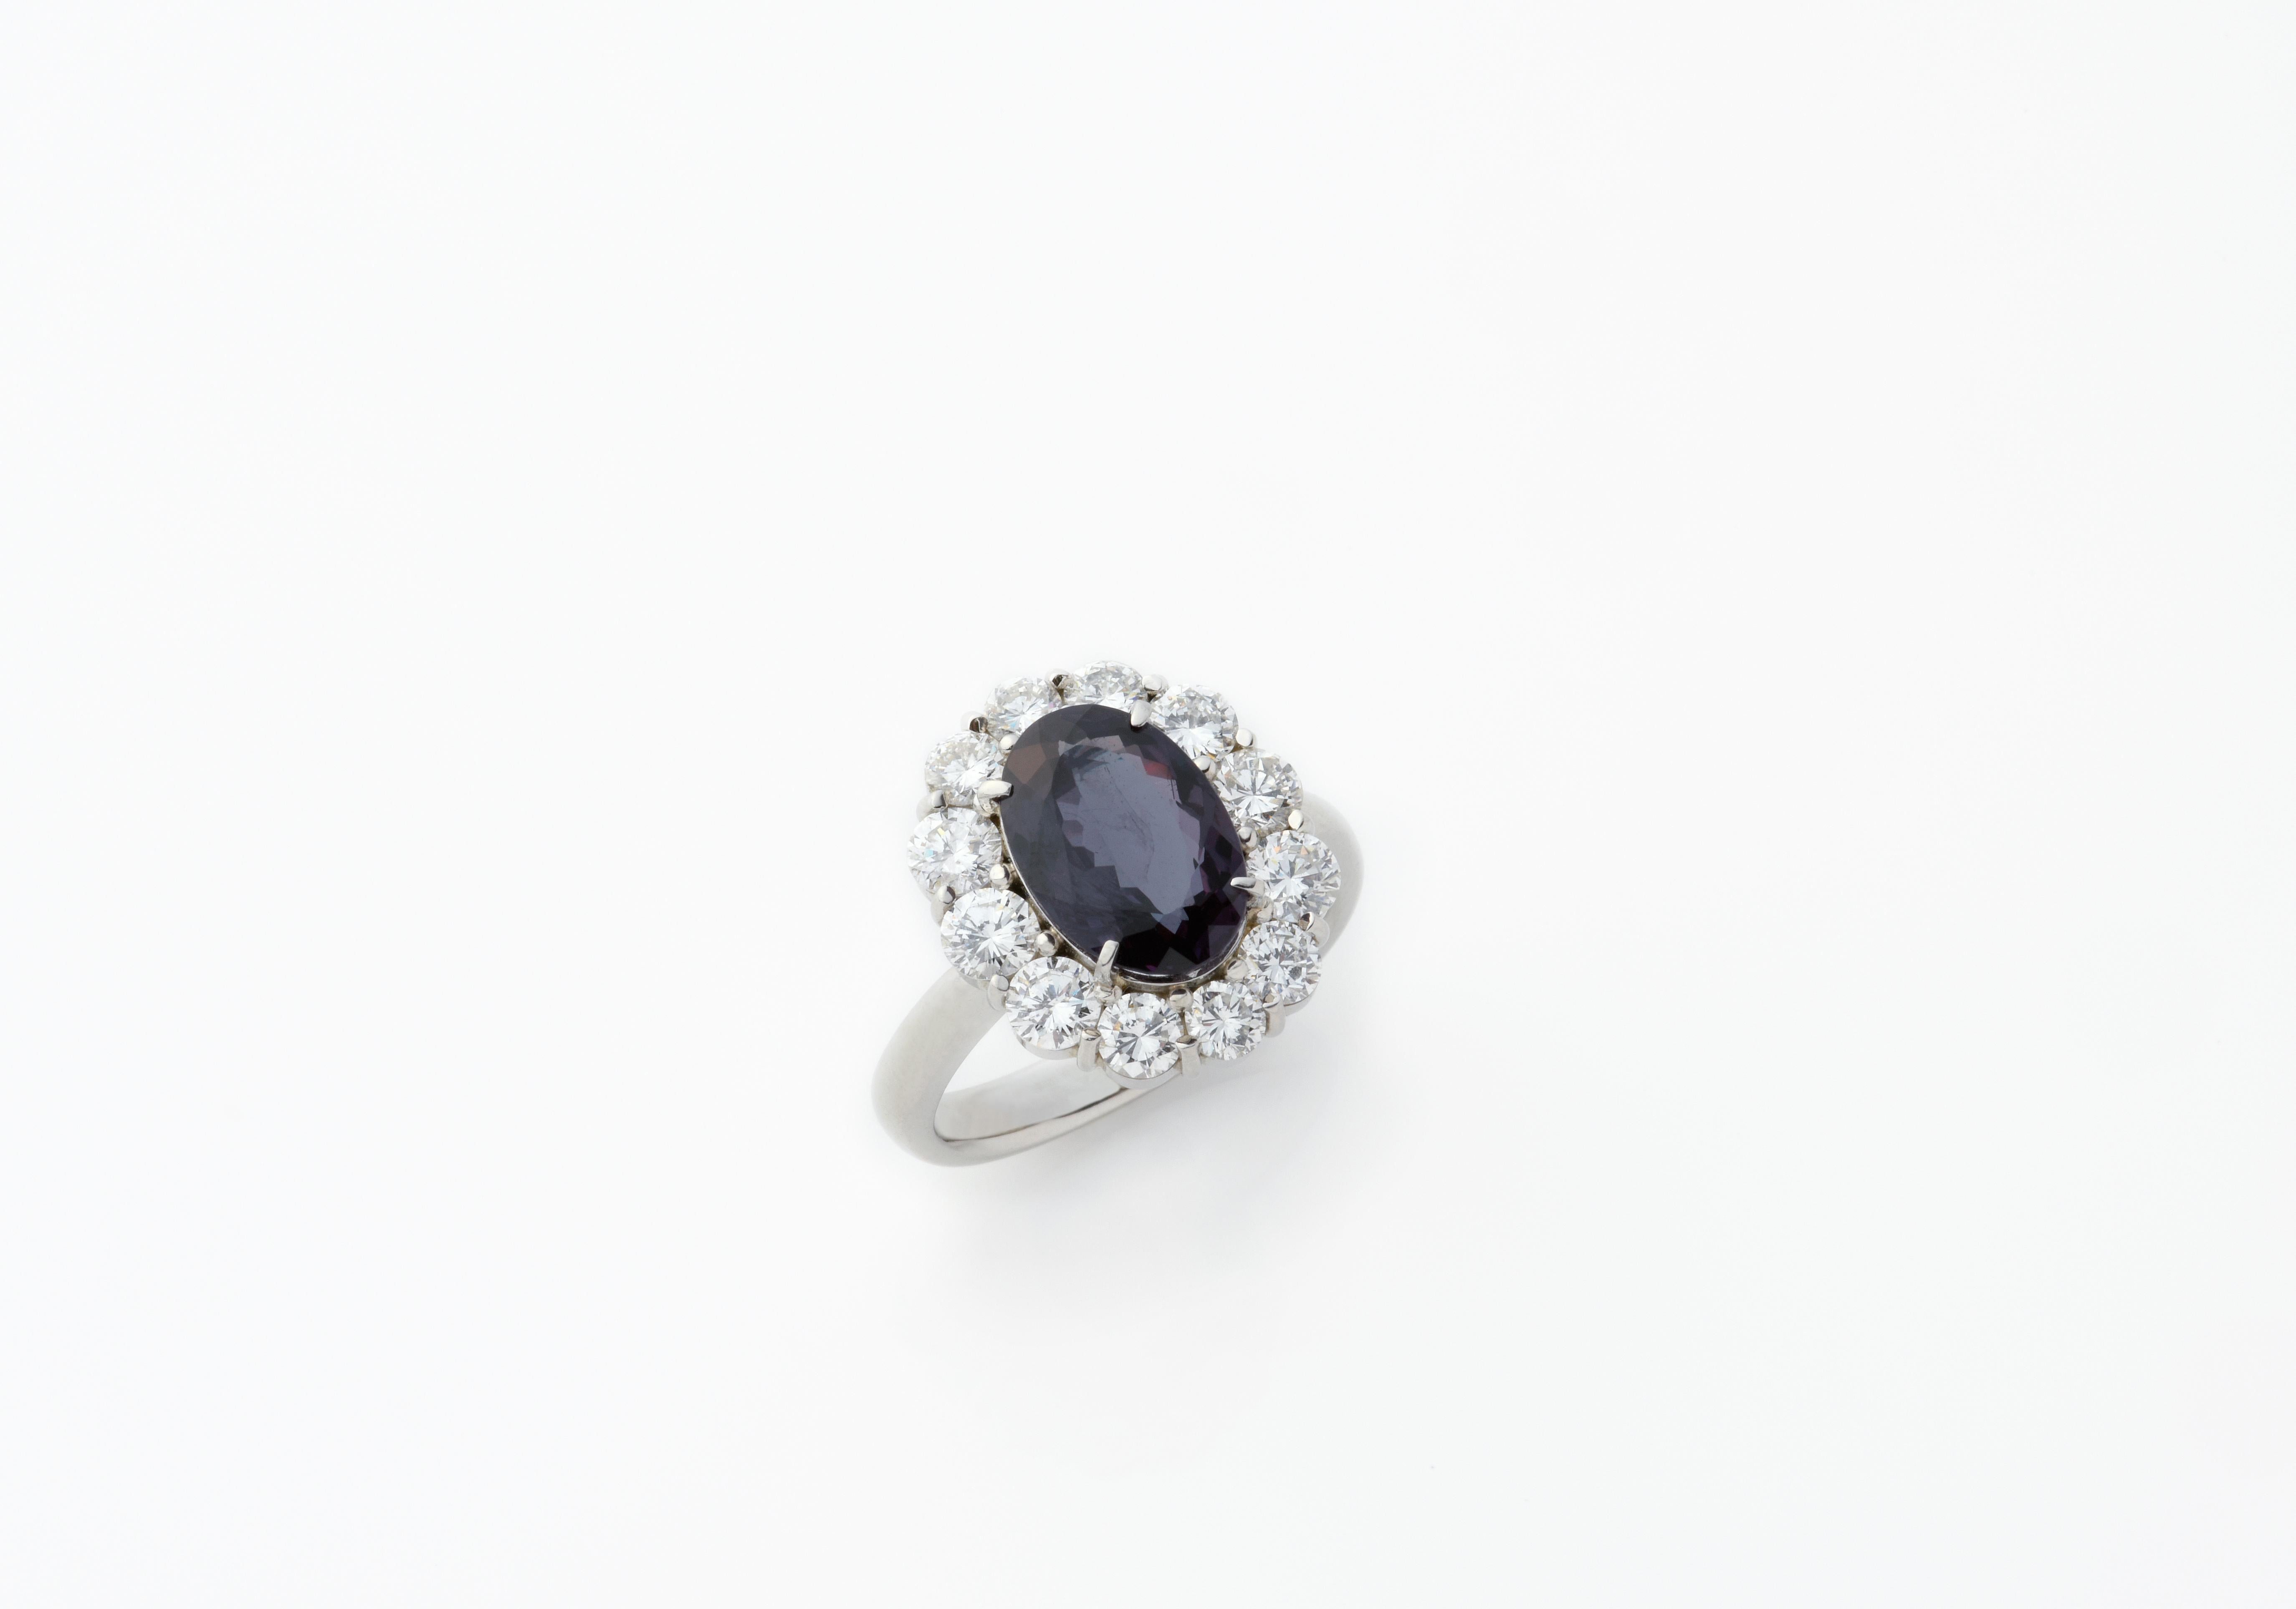 This one-of-a-kind marvel is a one-of-one in existence. Alexandrite at sizes greater than 1 carat are rarely found across all geographic sources, to begin with, but 1-carat stones from Brazil are even rarer.  The ring centers a beautiful and fine